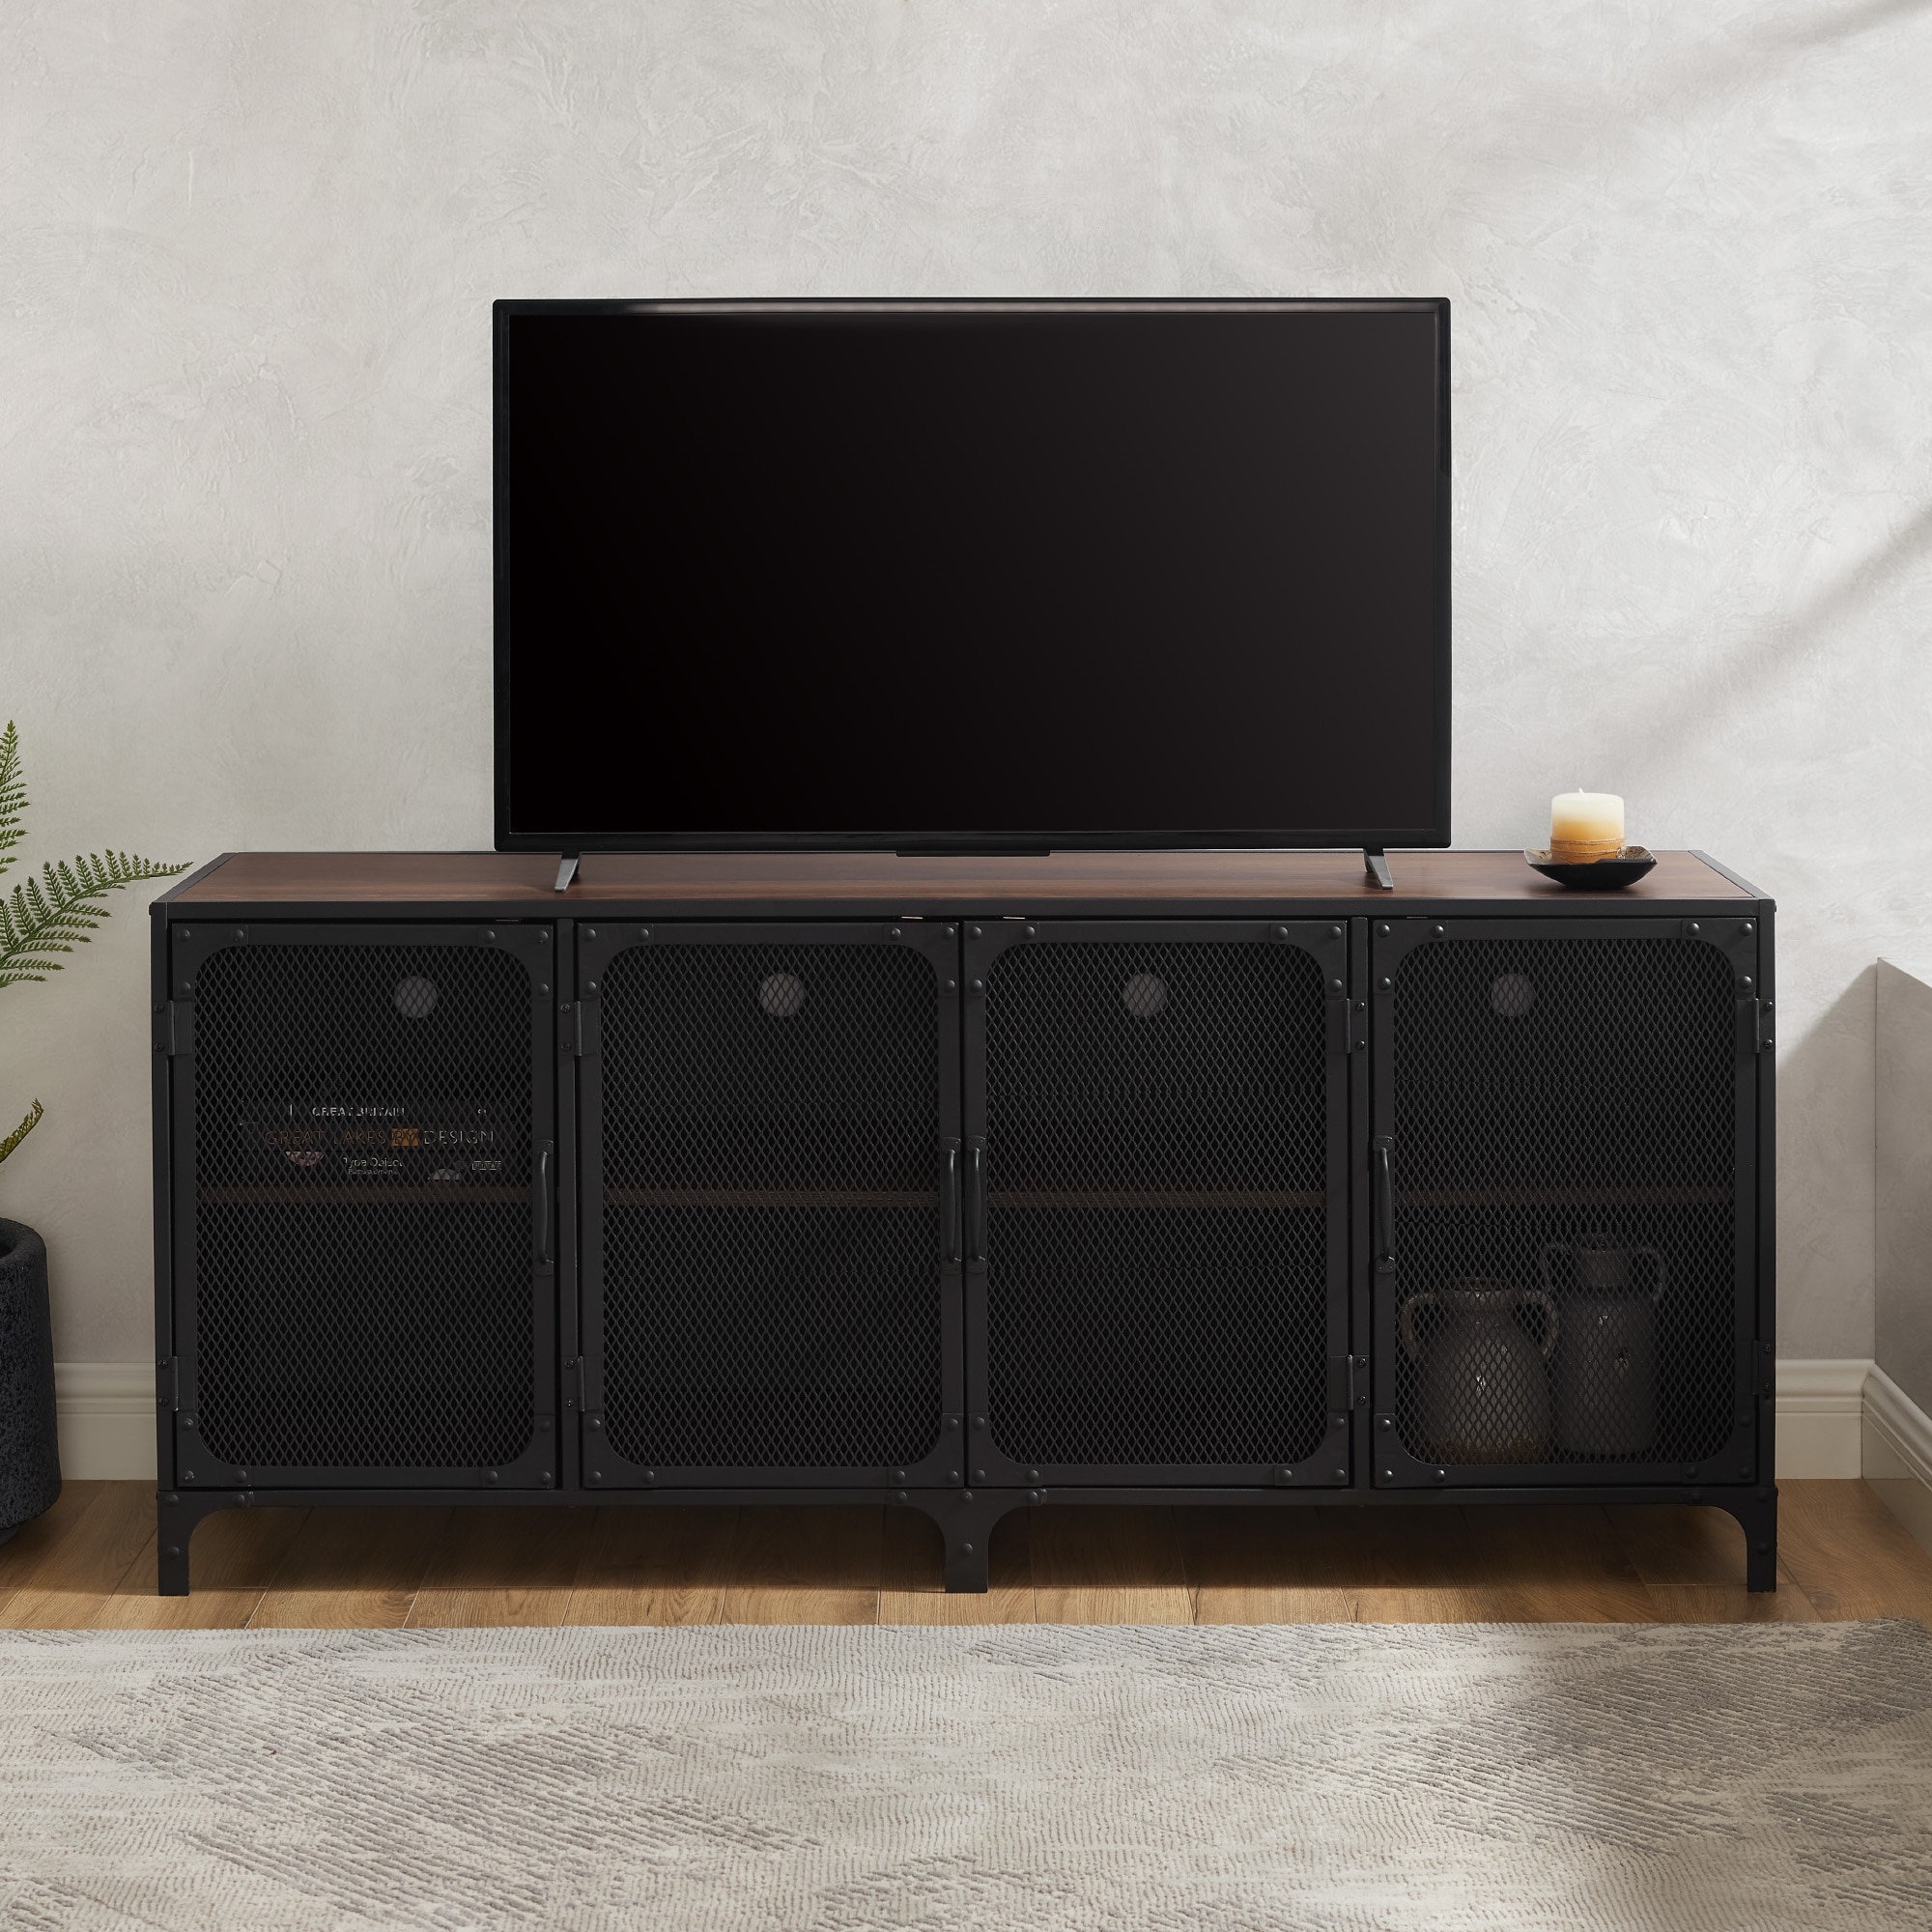 Featured image of post Metal Mesh Tv Stand / Metal mesh construction ensures lasting durability.